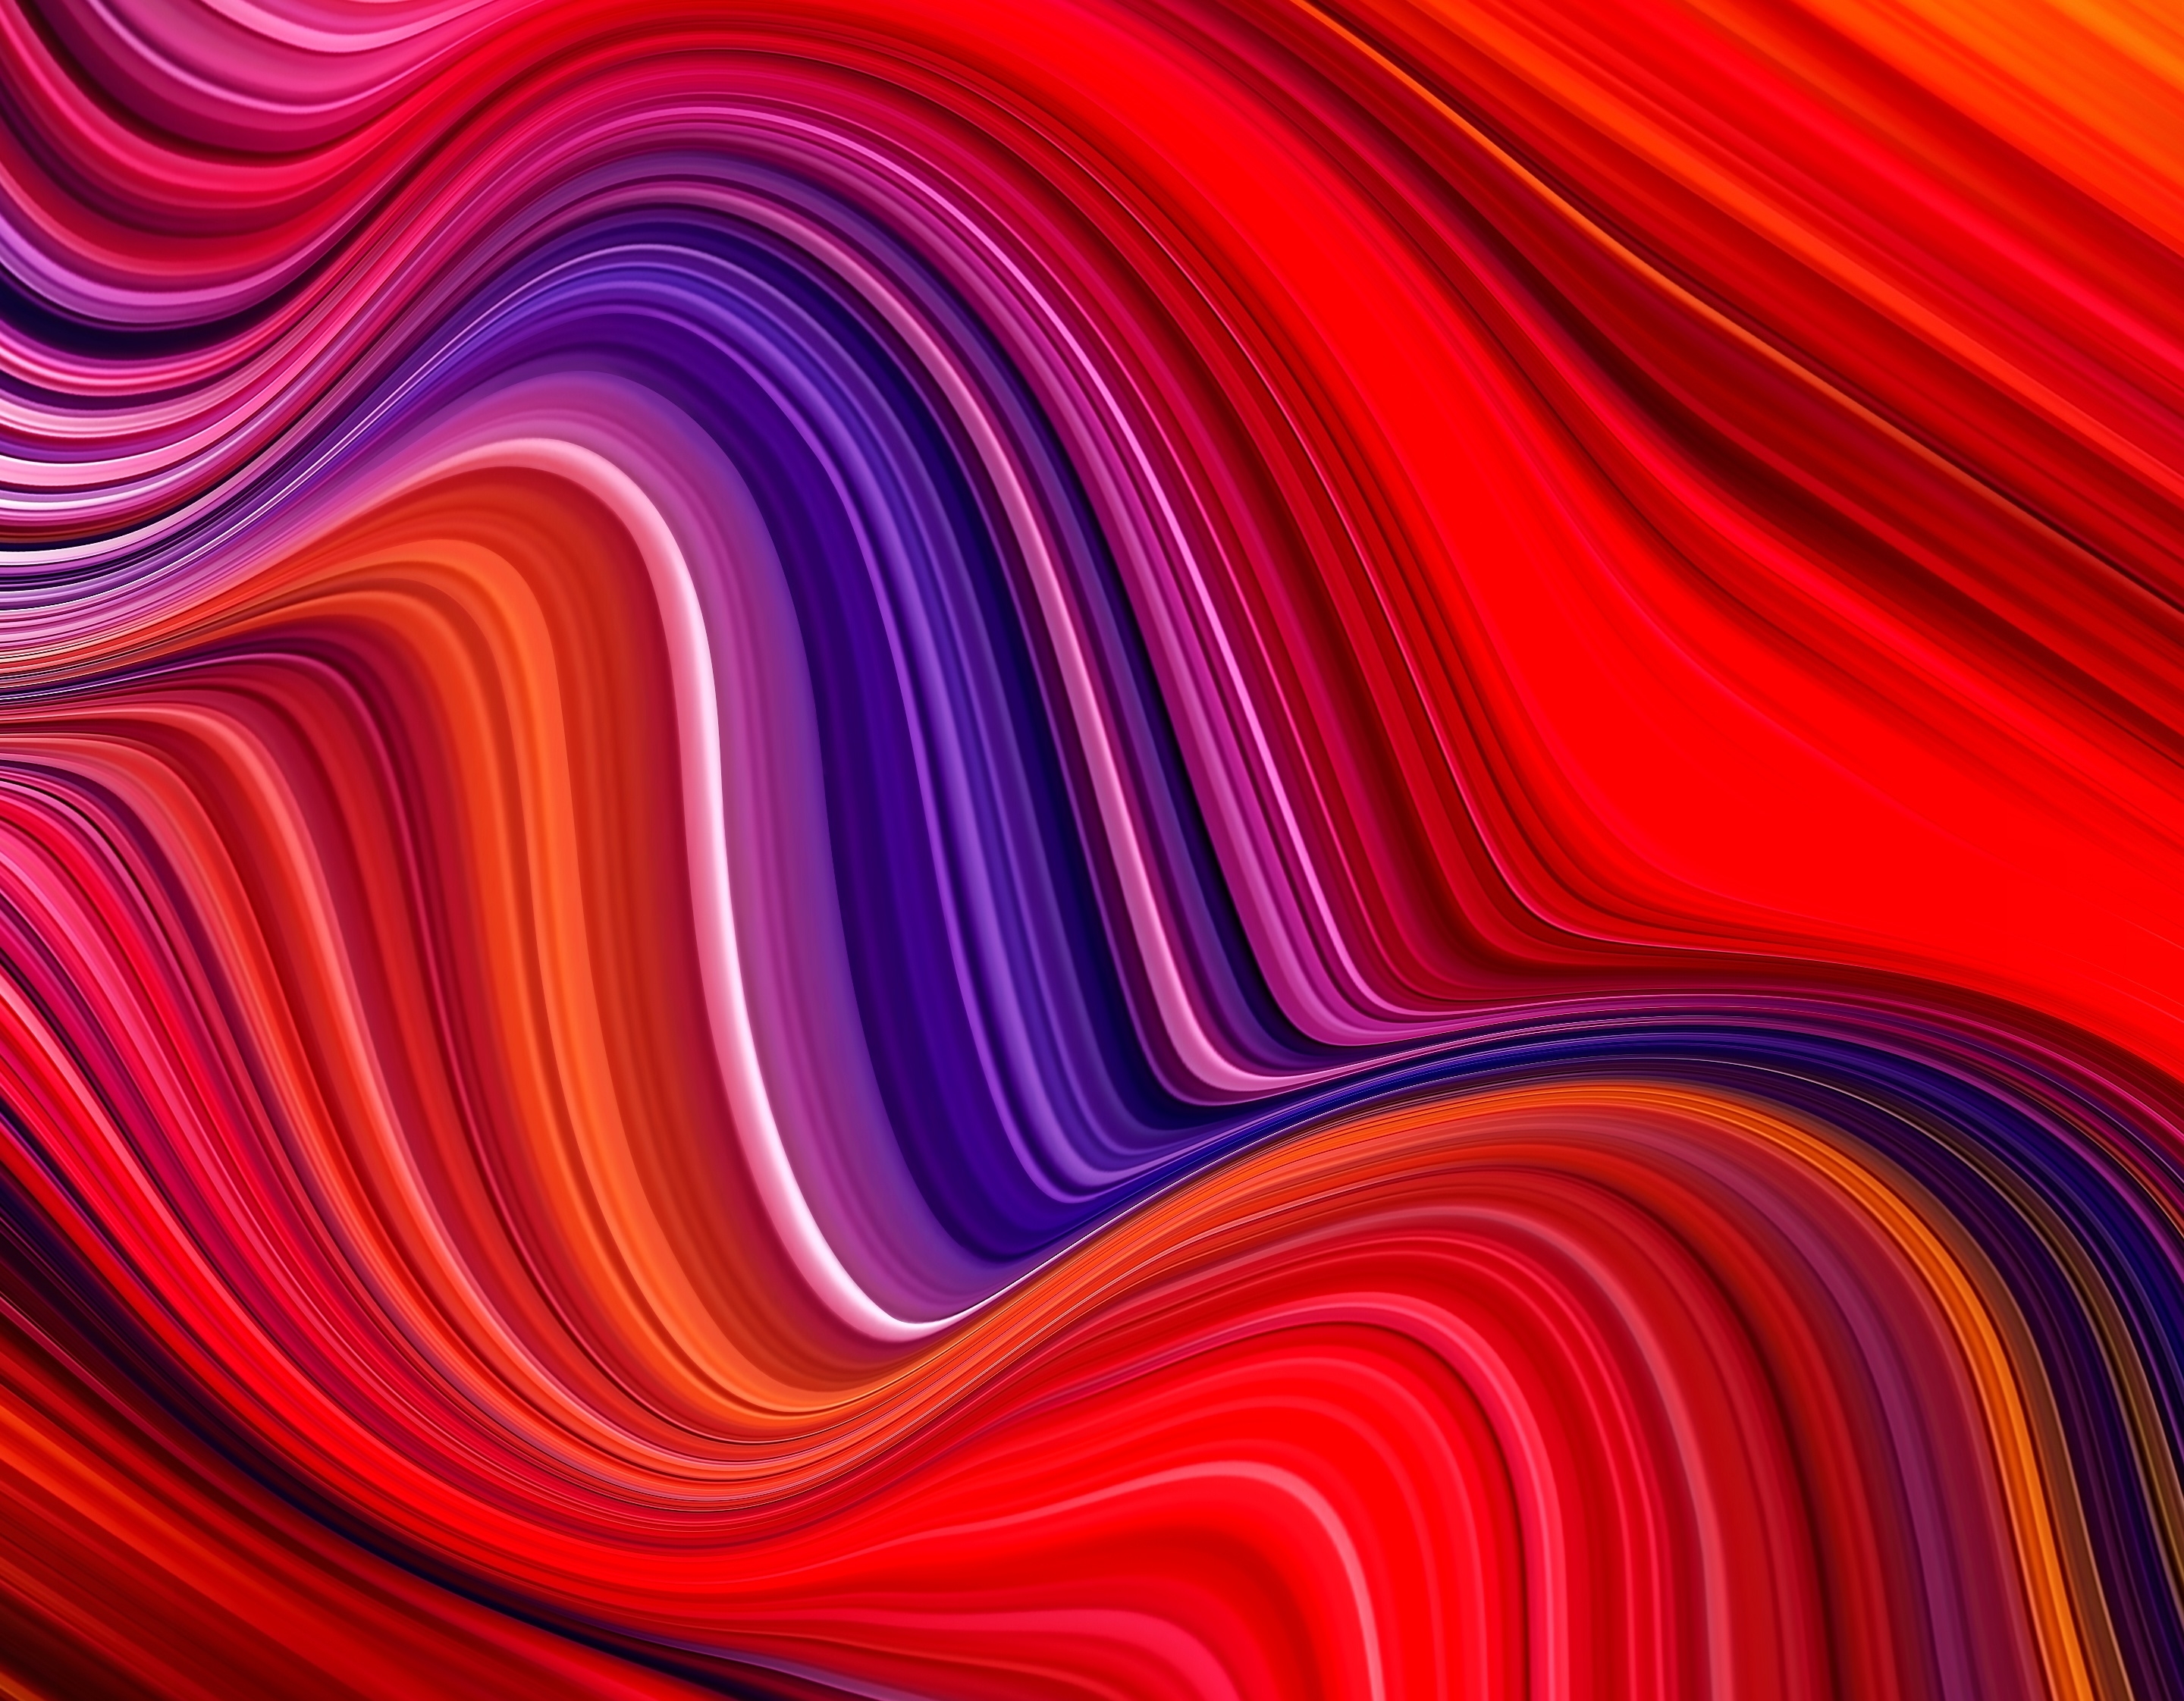 Smoky Design abstract colorful digital art simple background wallpaper  Poster Price in India - Buy Smoky Design abstract colorful digital art  simple background wallpaper Poster online at Flipkart.com